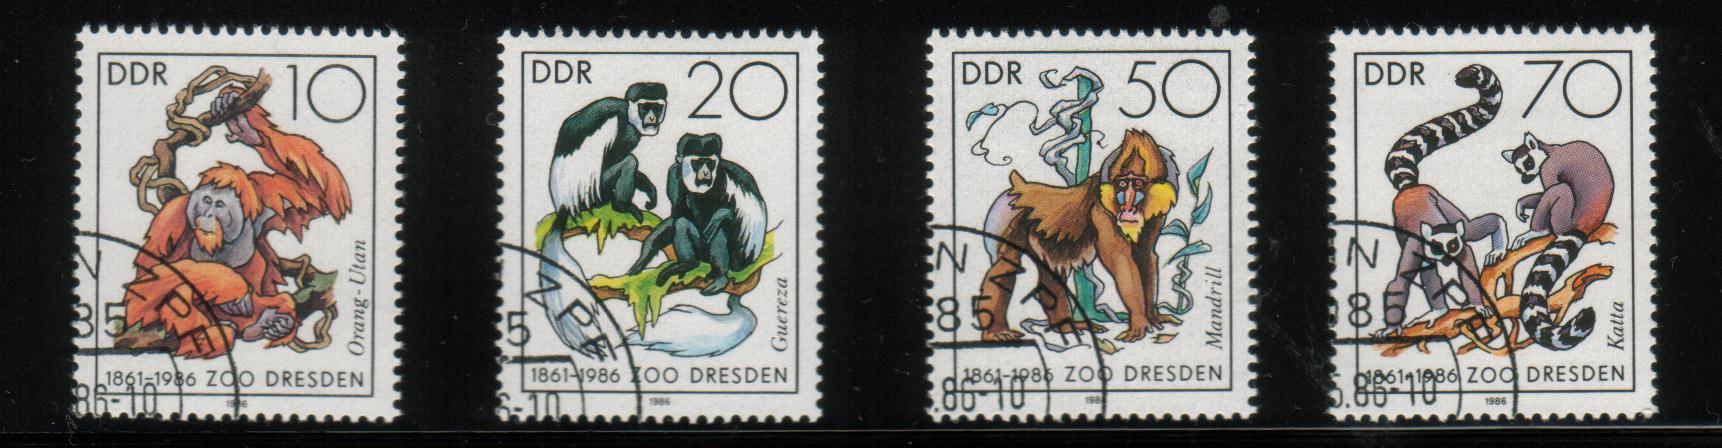 DDR 1986 DRESDEN ZOO (APES) SET OF 4 VFU - Scimmie